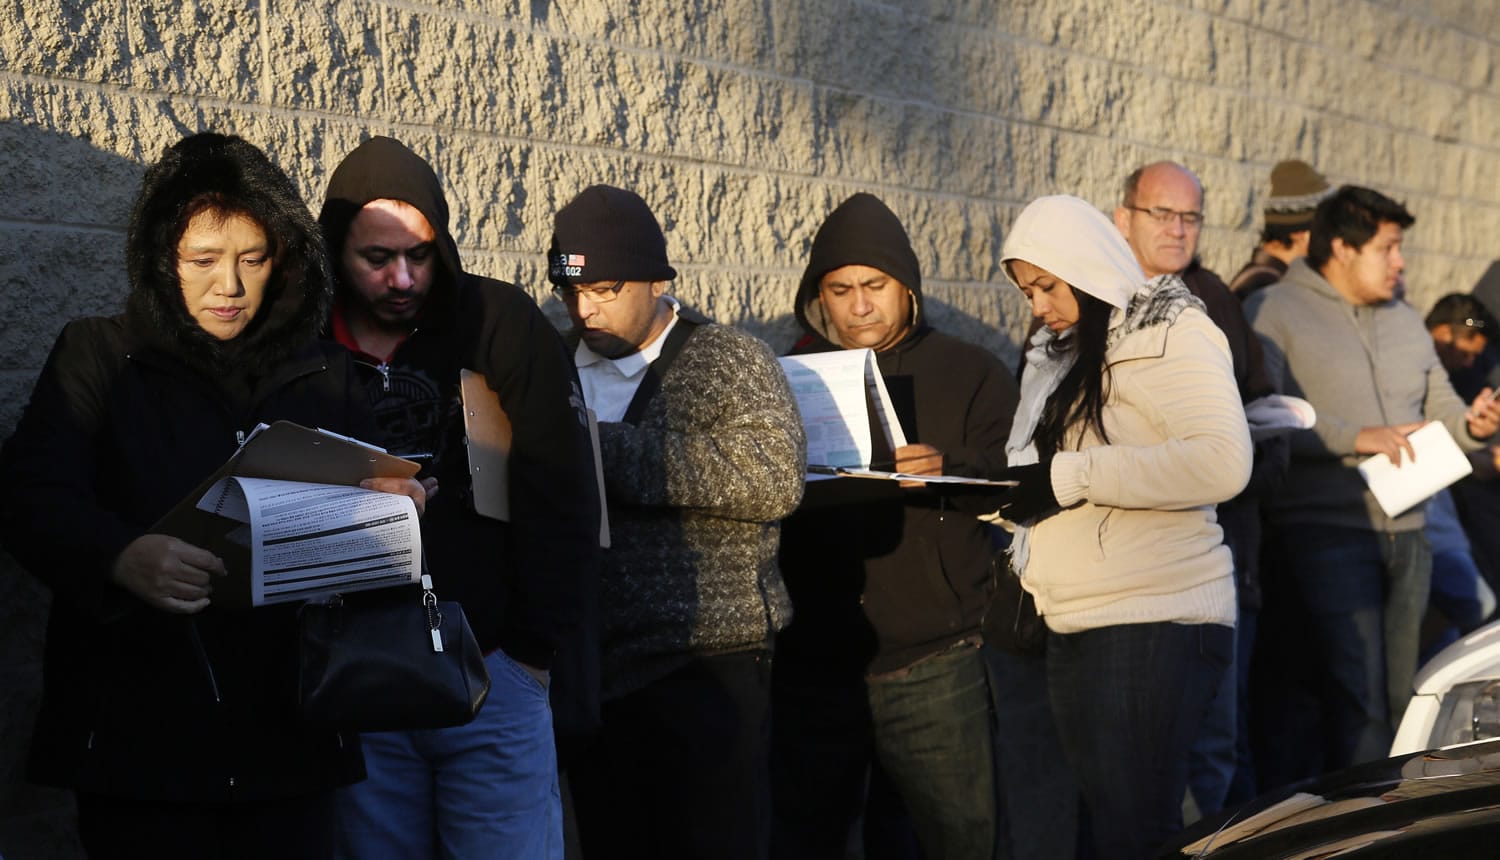 Immigrants line up Friday after spending the night outside a California Department of Motor Vehicles office in Stanton, Calif.